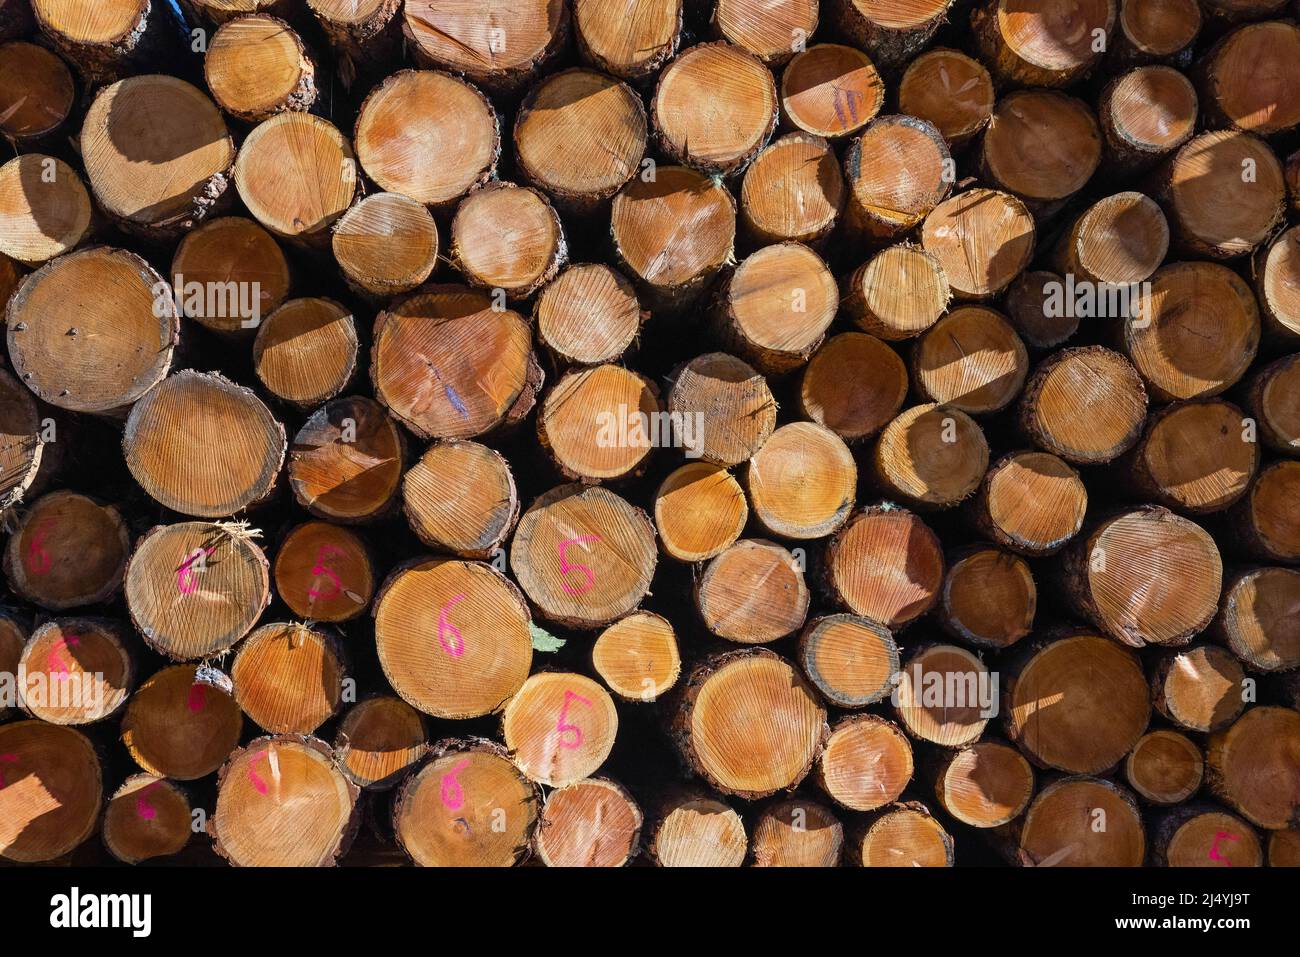 Geometric close up of a pile of stacked logs, with numbers painted with fuchsia spray Stock Photo